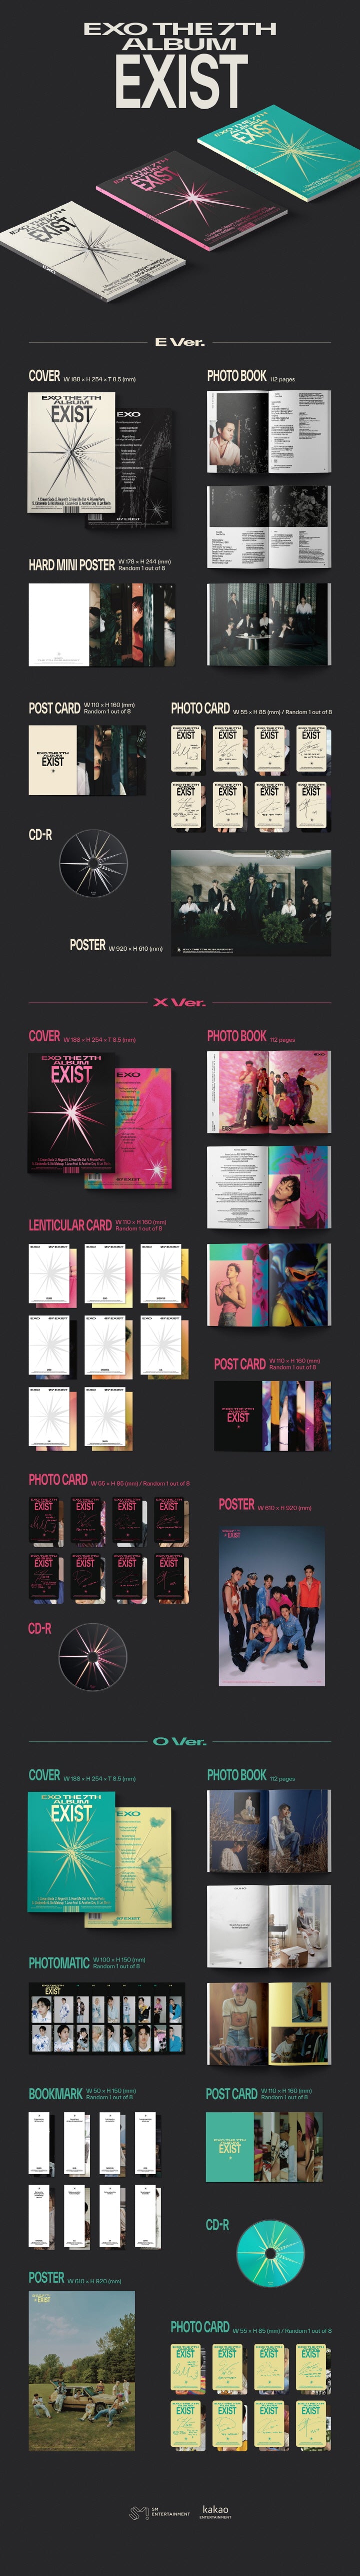 1 CD
1 Photo Book (112 pages)
1 Lenticular Card (random out of 8 types)
1 Postcard (random out of 8 types)
1 Photo Card (r...